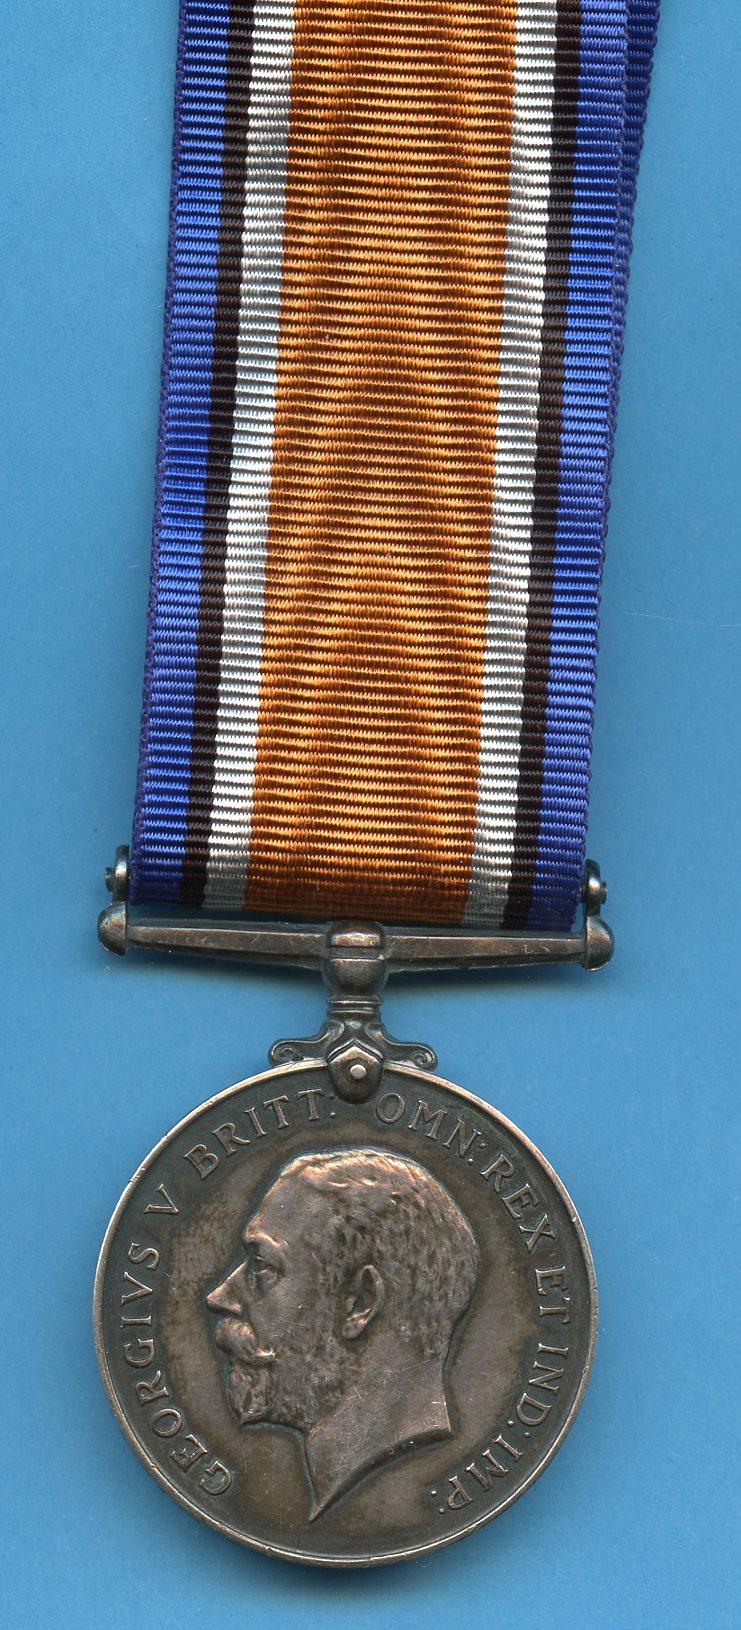 British War Medal 1914-18 To WR- 206426 Spr James Cook, Railway Company Royal Engineers